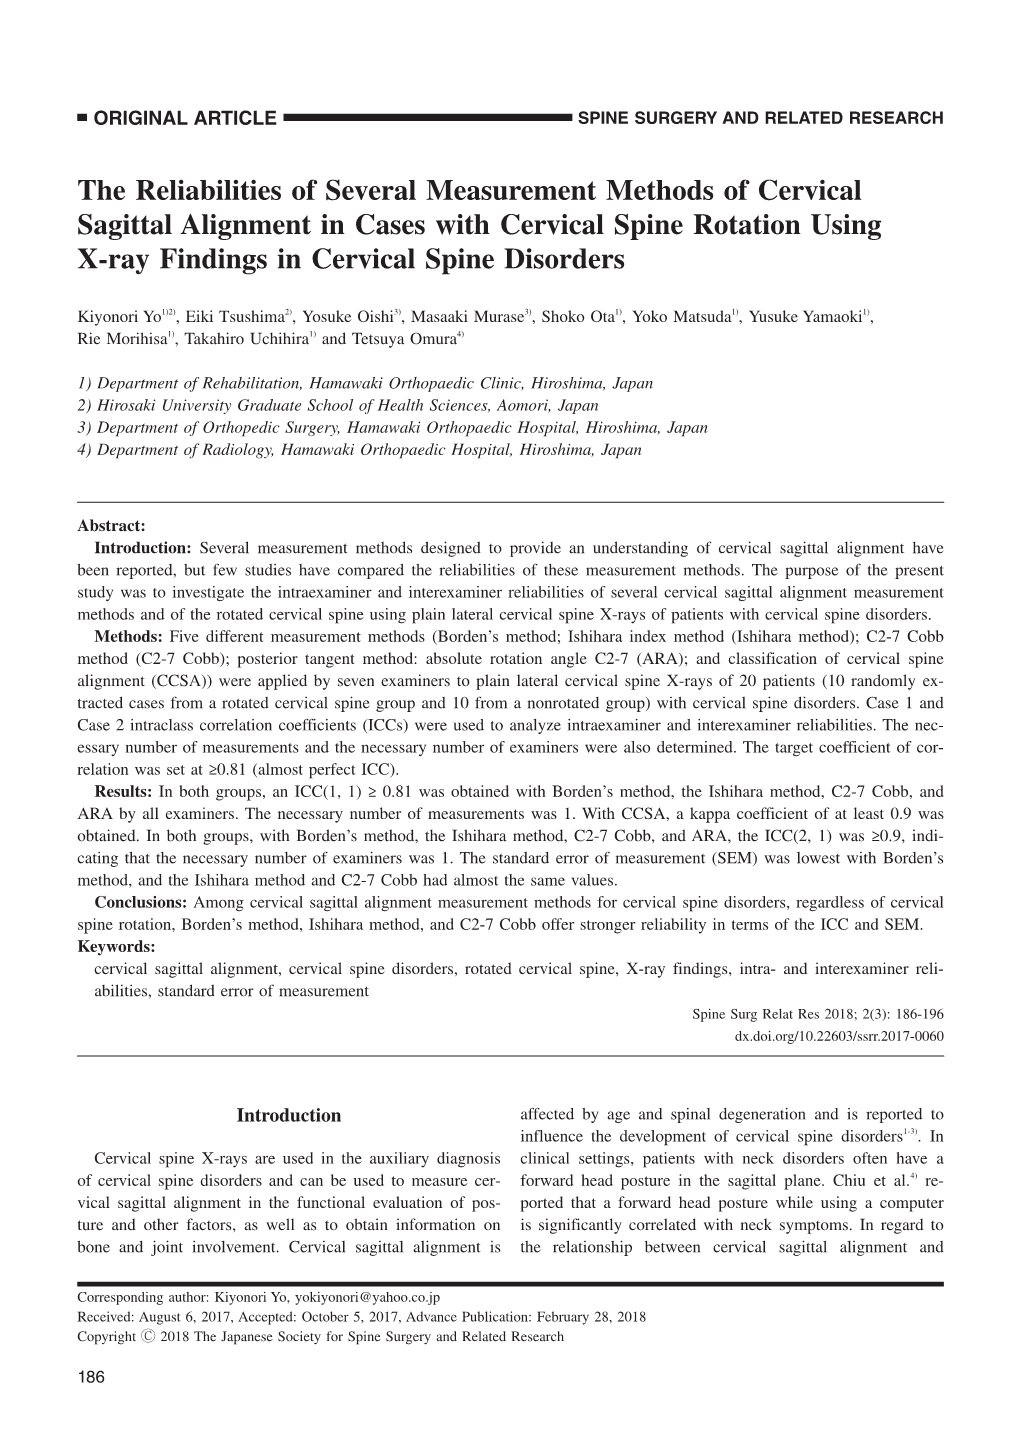 The Reliabilities of Several Measurement Methods of Cervical Sagittal Alignment in Cases with Cervical Spine Rotation Using X-Ray Findings in Cervical Spine Disorders